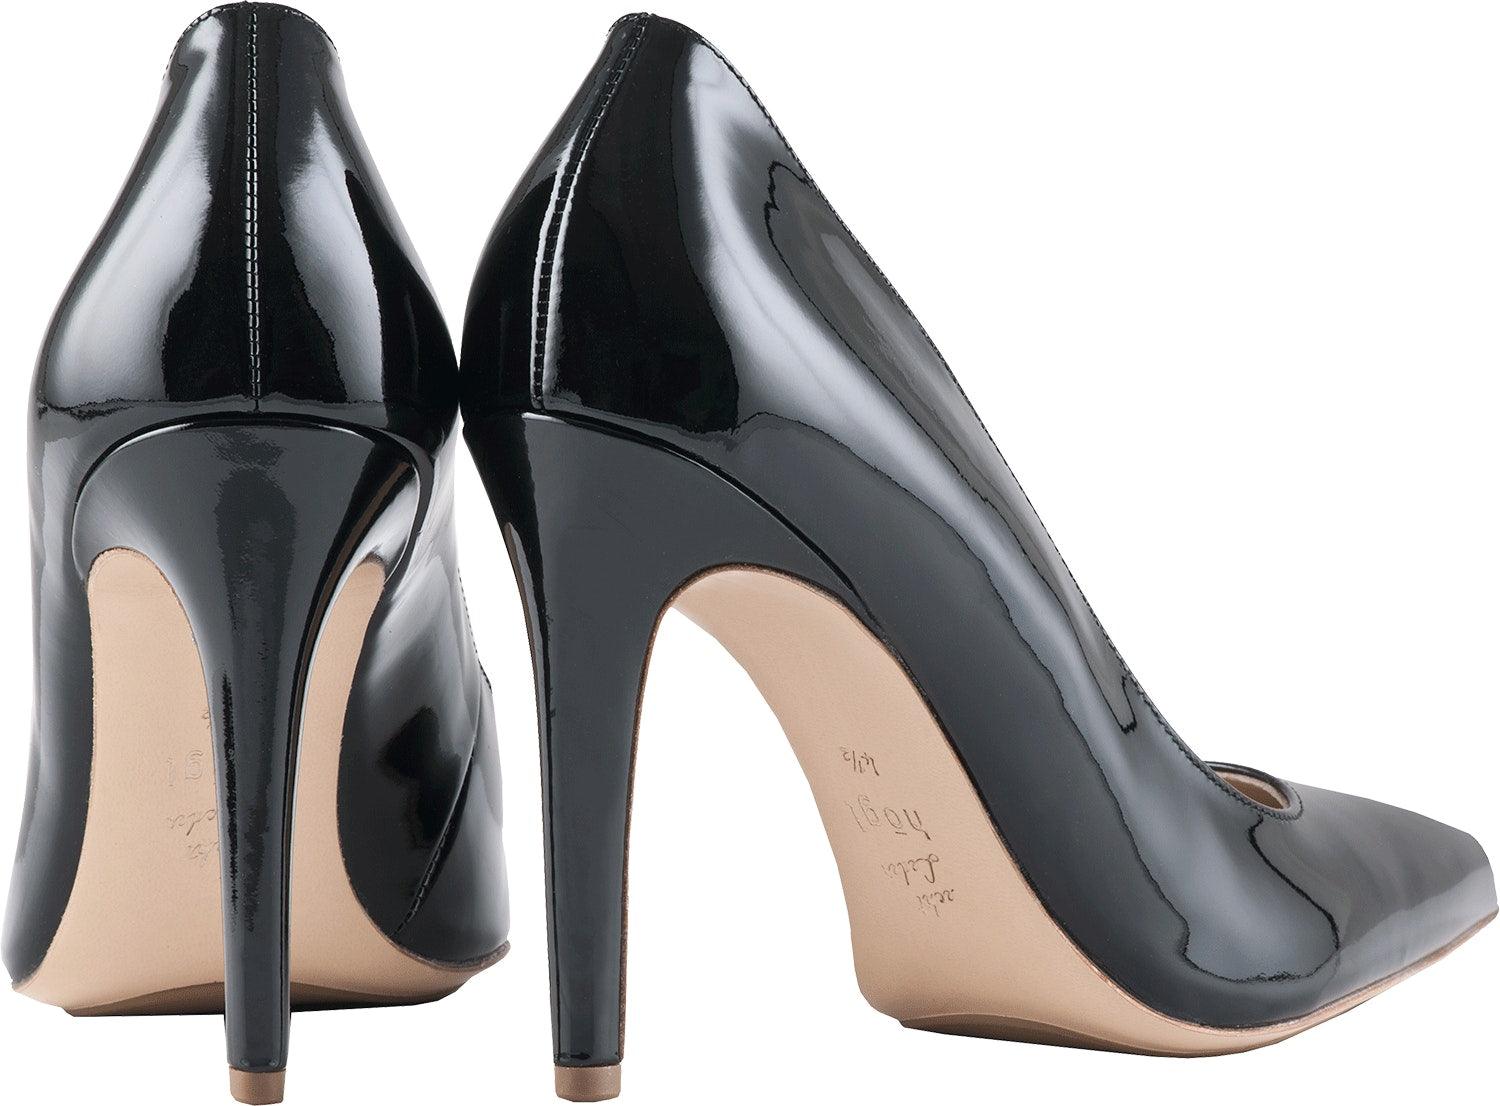 Cador Leather Stiletto Heels | GUESS